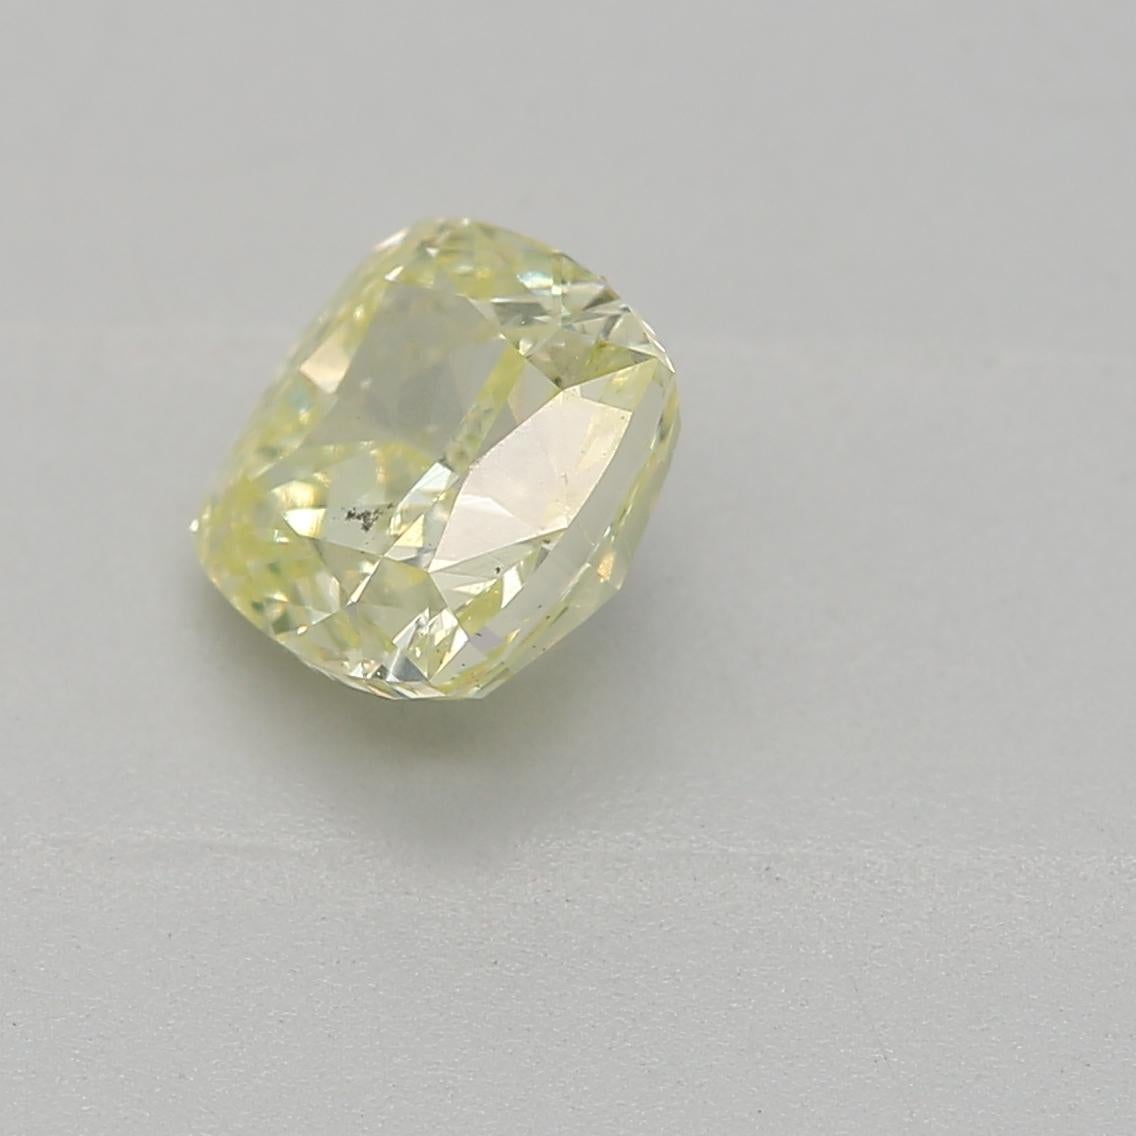 ***100% NATURAL FANCY COLOUR DIAMOND***

✪ Diamond Details ✪

➛ Shape: cushion
➛ Colour Grade: Fancy Green Yellow
➛ Carat: 0.70
➛ Clarity: si1
➛ GIA Certified 

^FEATURES OF THE DIAMOND^

Our 0.70 carat diamond is a relatively small diamond in terms